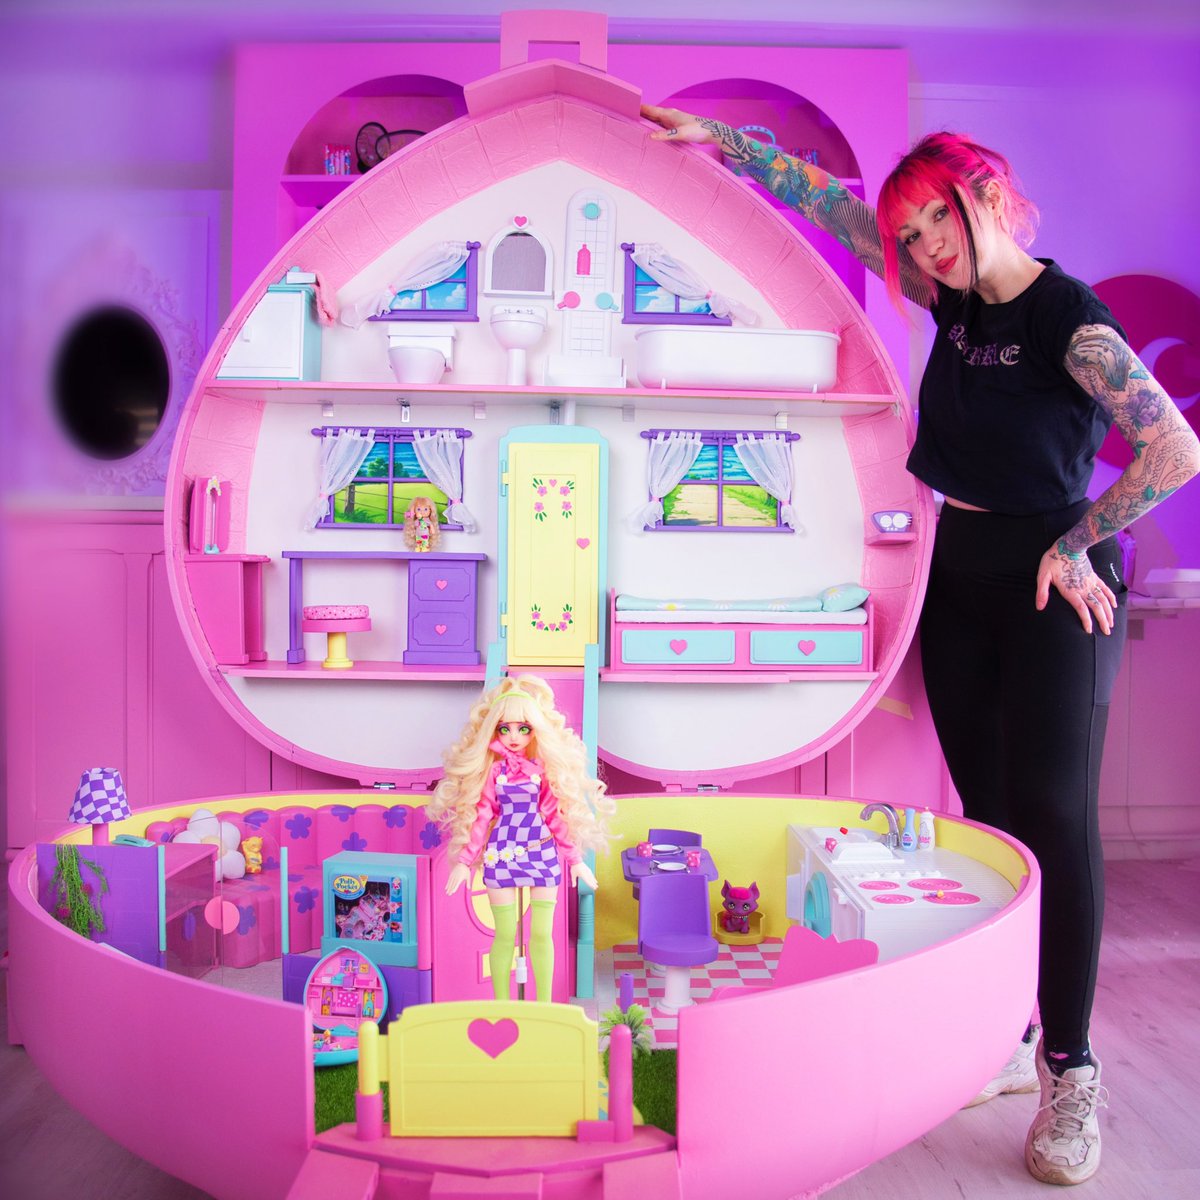 Not a photoshopped image, I made an actual gigantic Polly Pocket house + doll, watch the video here: youtu.be/iFjyqZ9Da-w #pollypocket #mattel #art #artist